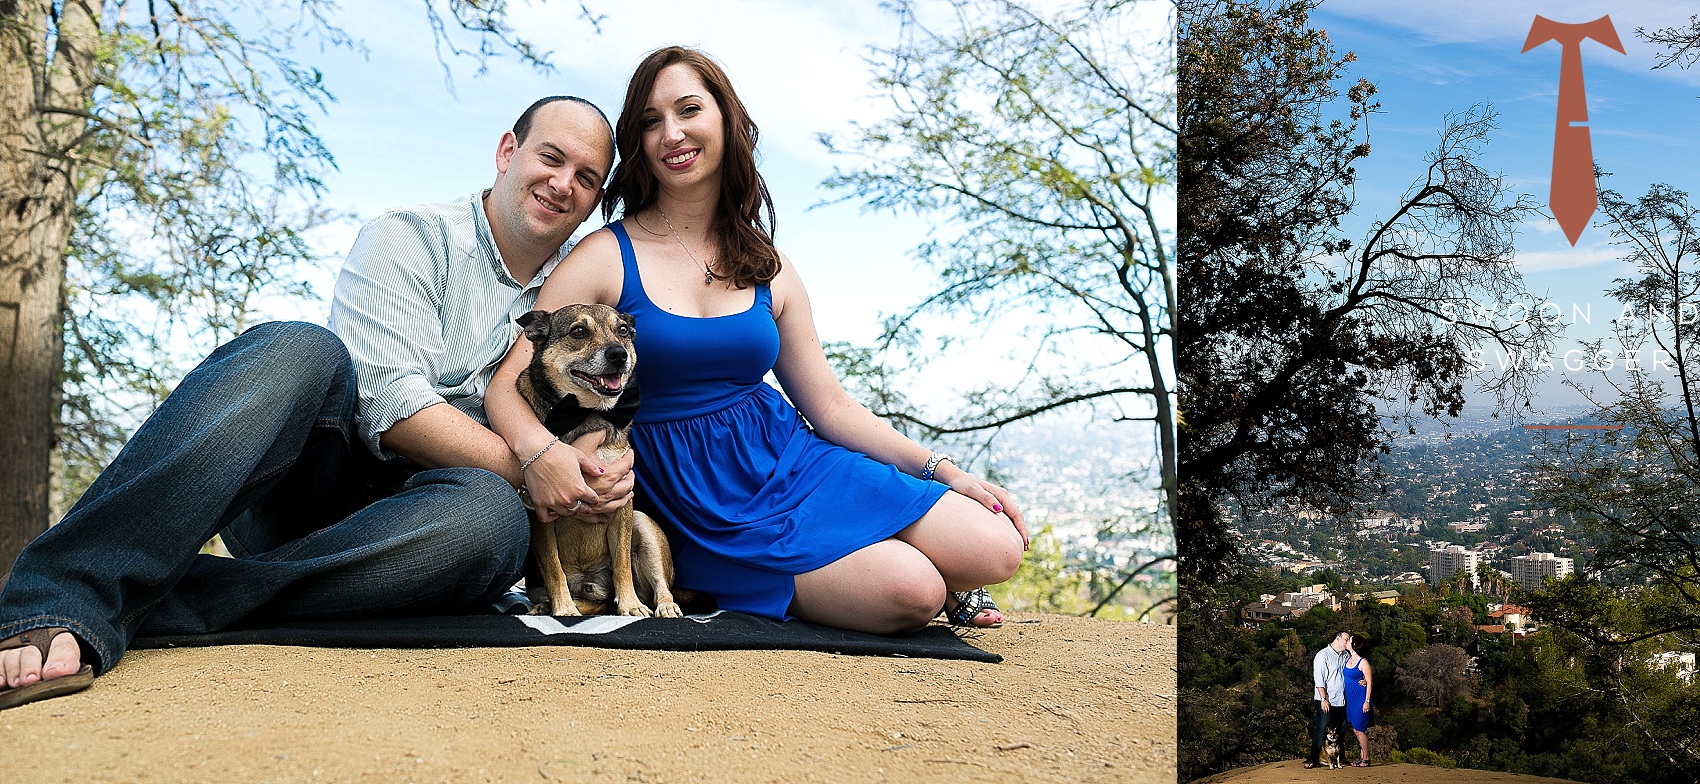 los angeles griffith observatory engagement session photos (5)